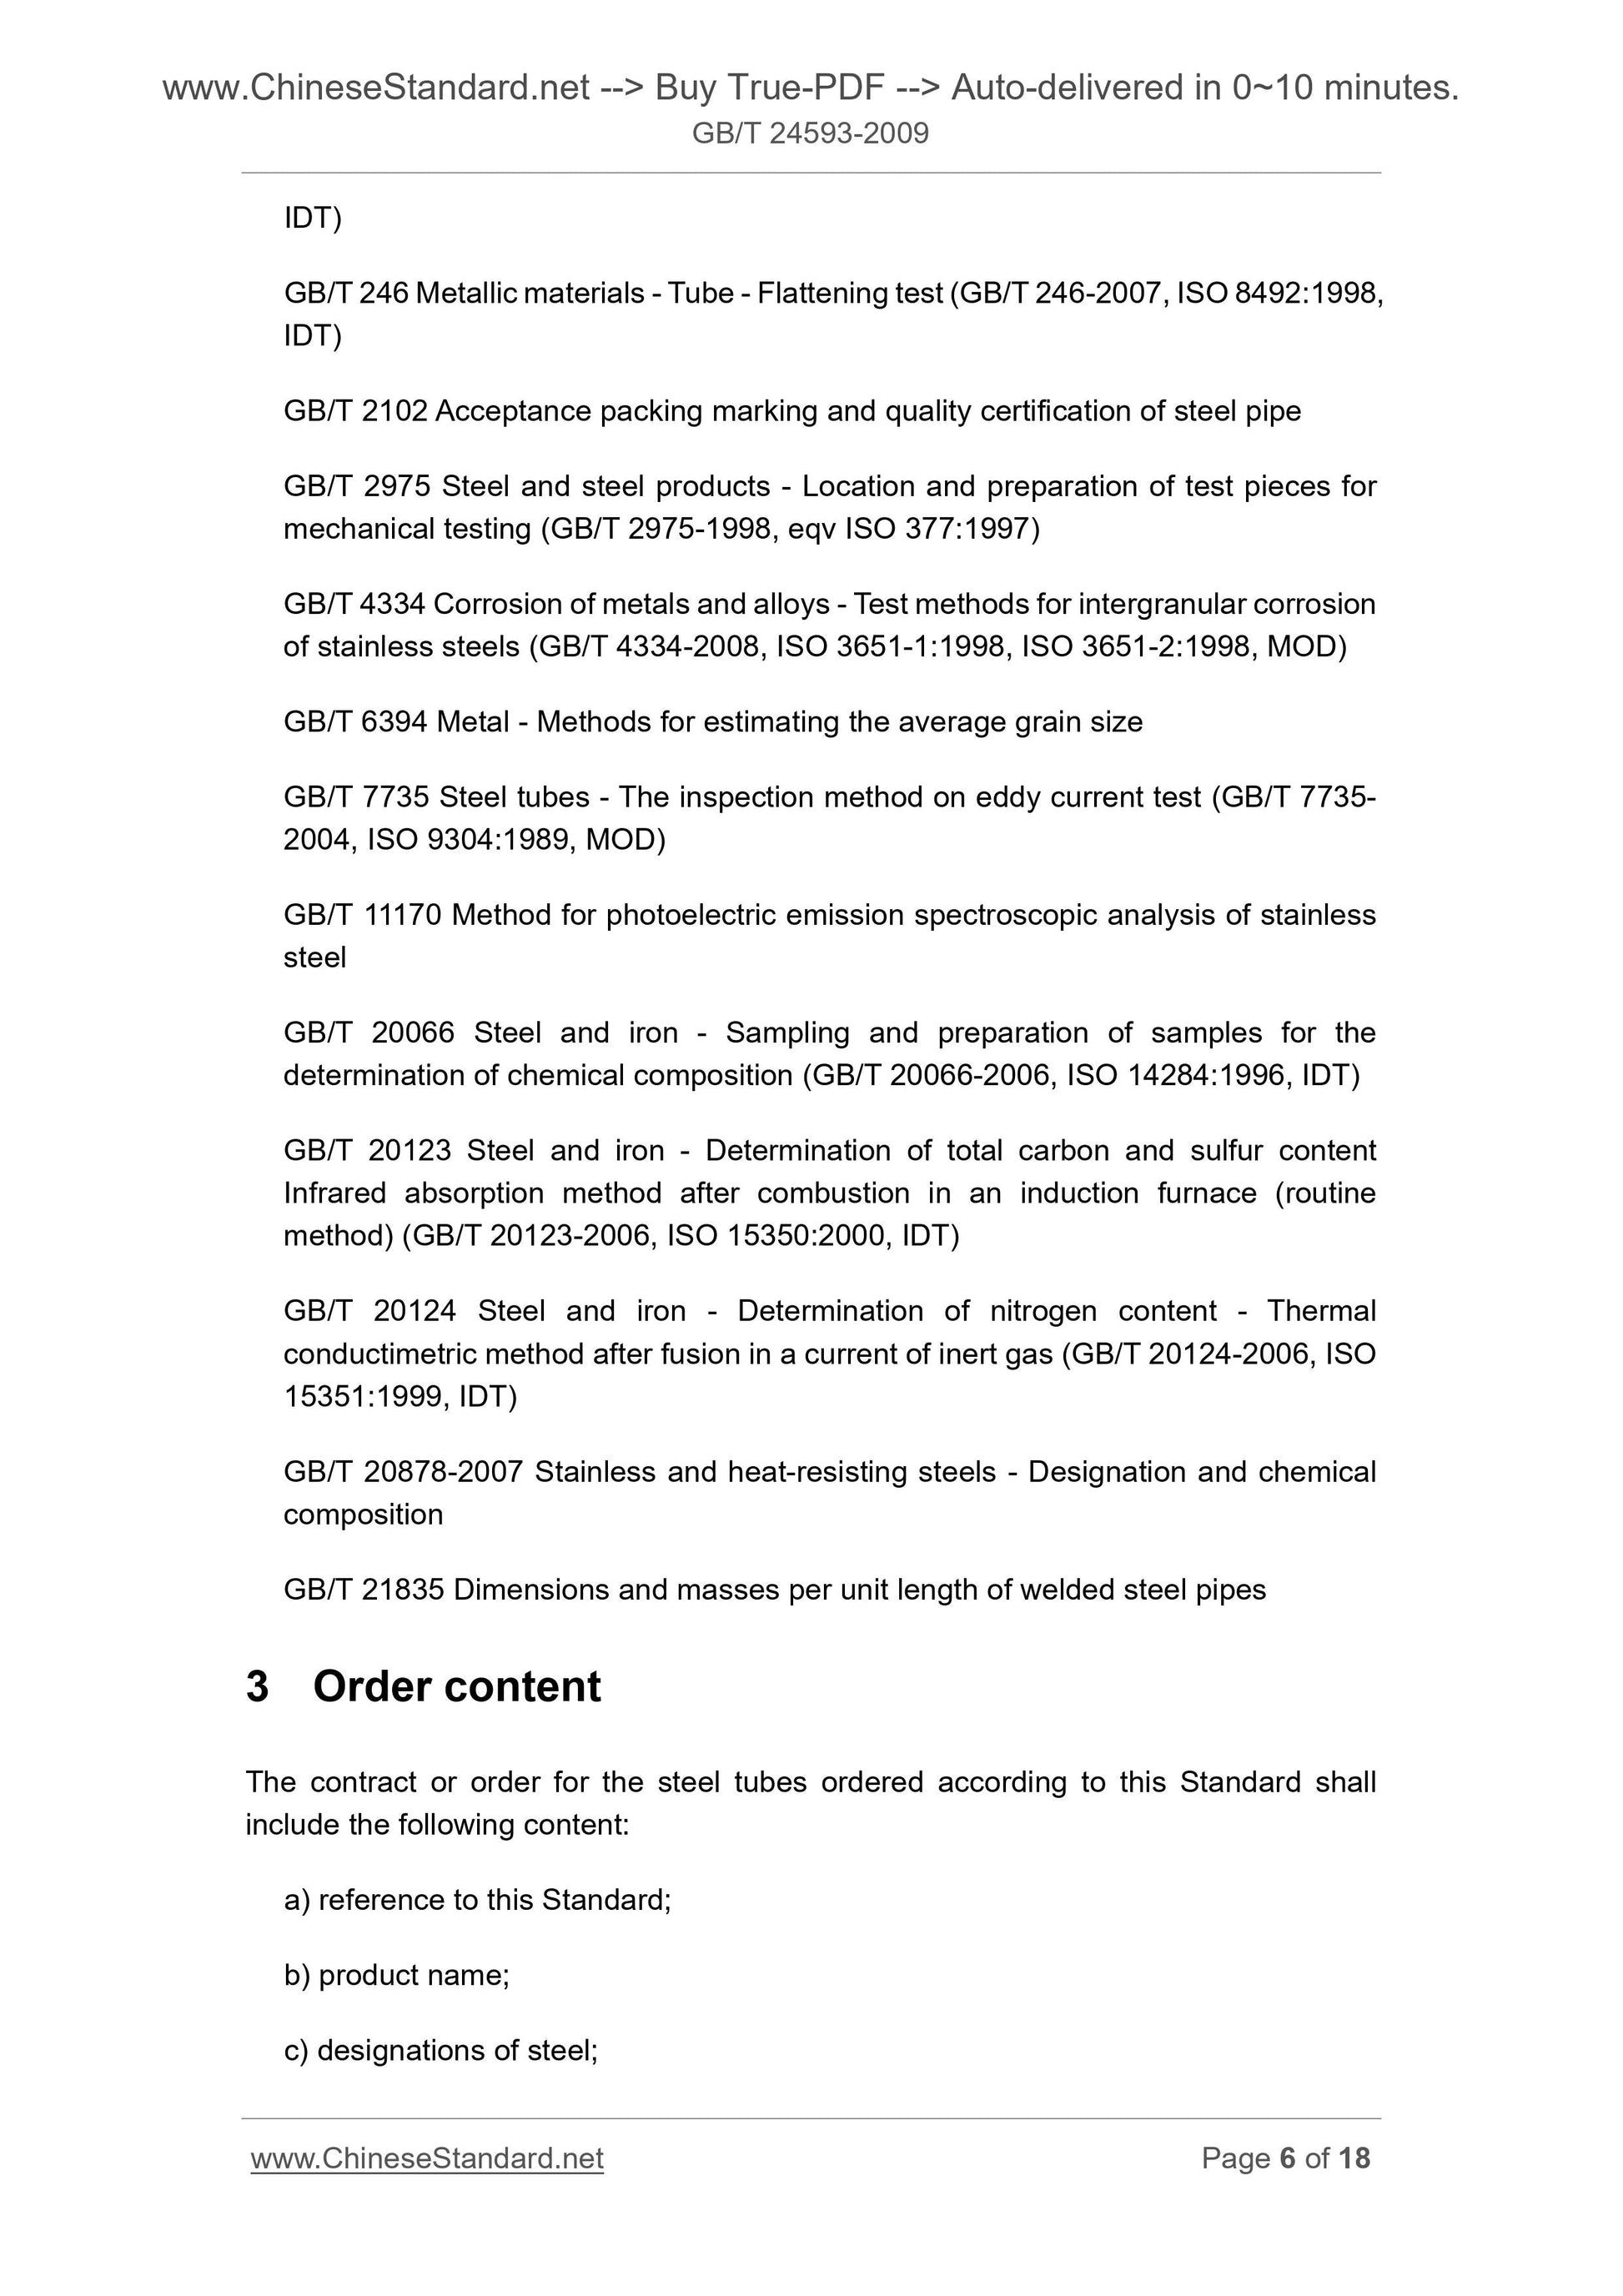 GB/T 24593-2009 Page 6